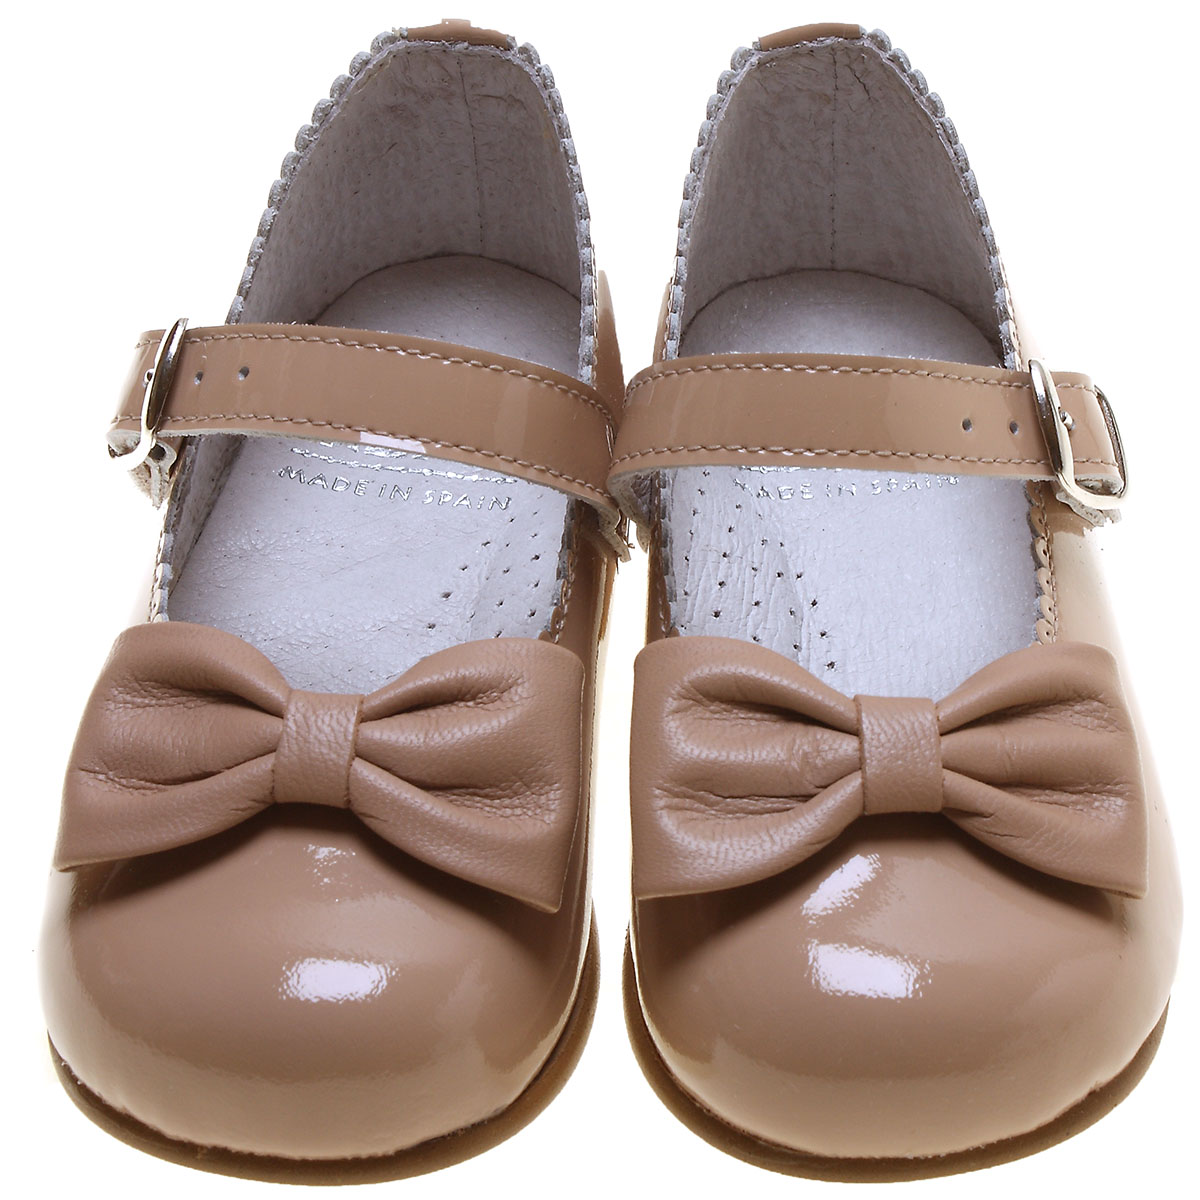 Girls Caramel Brown Patent Mary Jane Shoes With a Bow